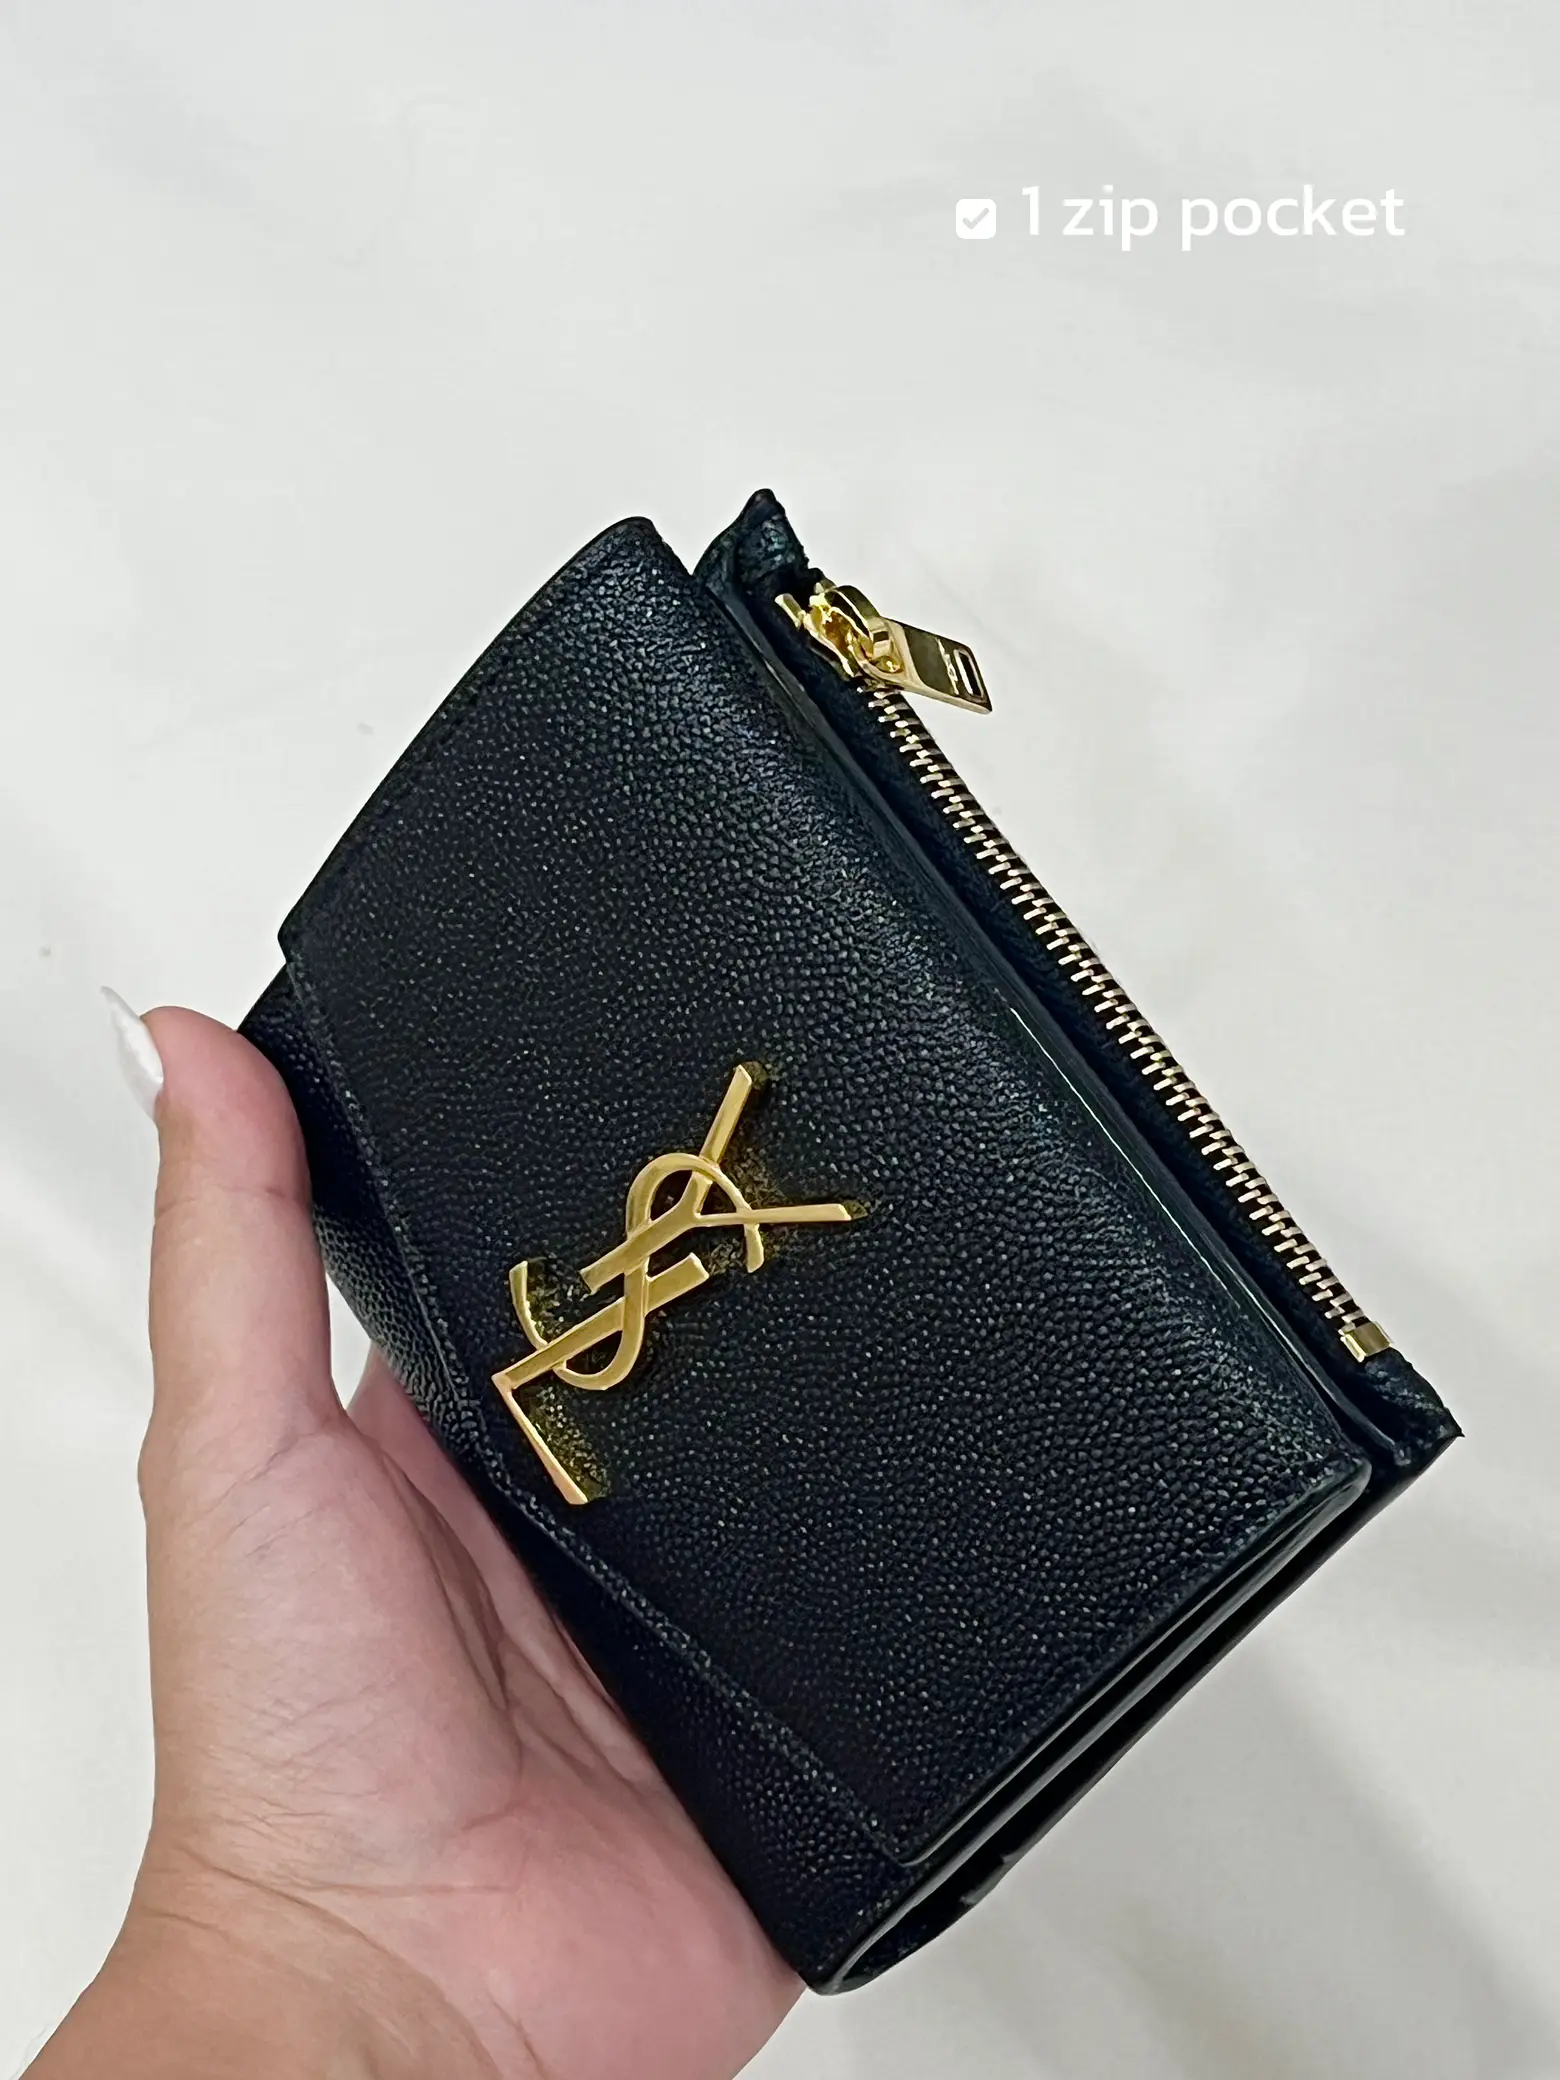 YSL UPTOWN CLUTCH POUCH WHAT FITS INSIDE!? REVIEW & UNBOXING PROS